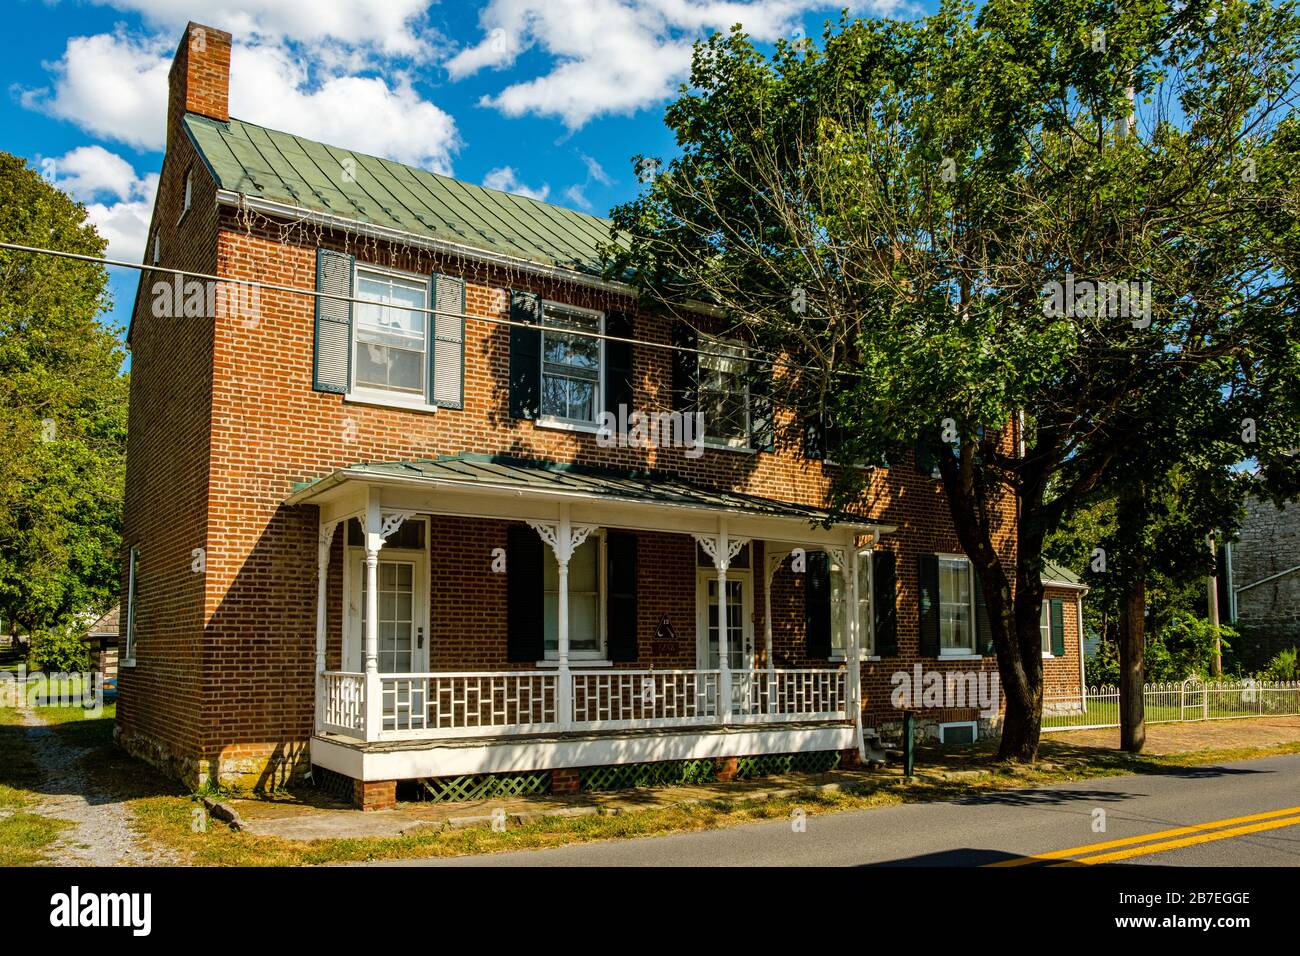 David Smith House, 7268 Queen Street, Middleway, West Virginia Stock Photo